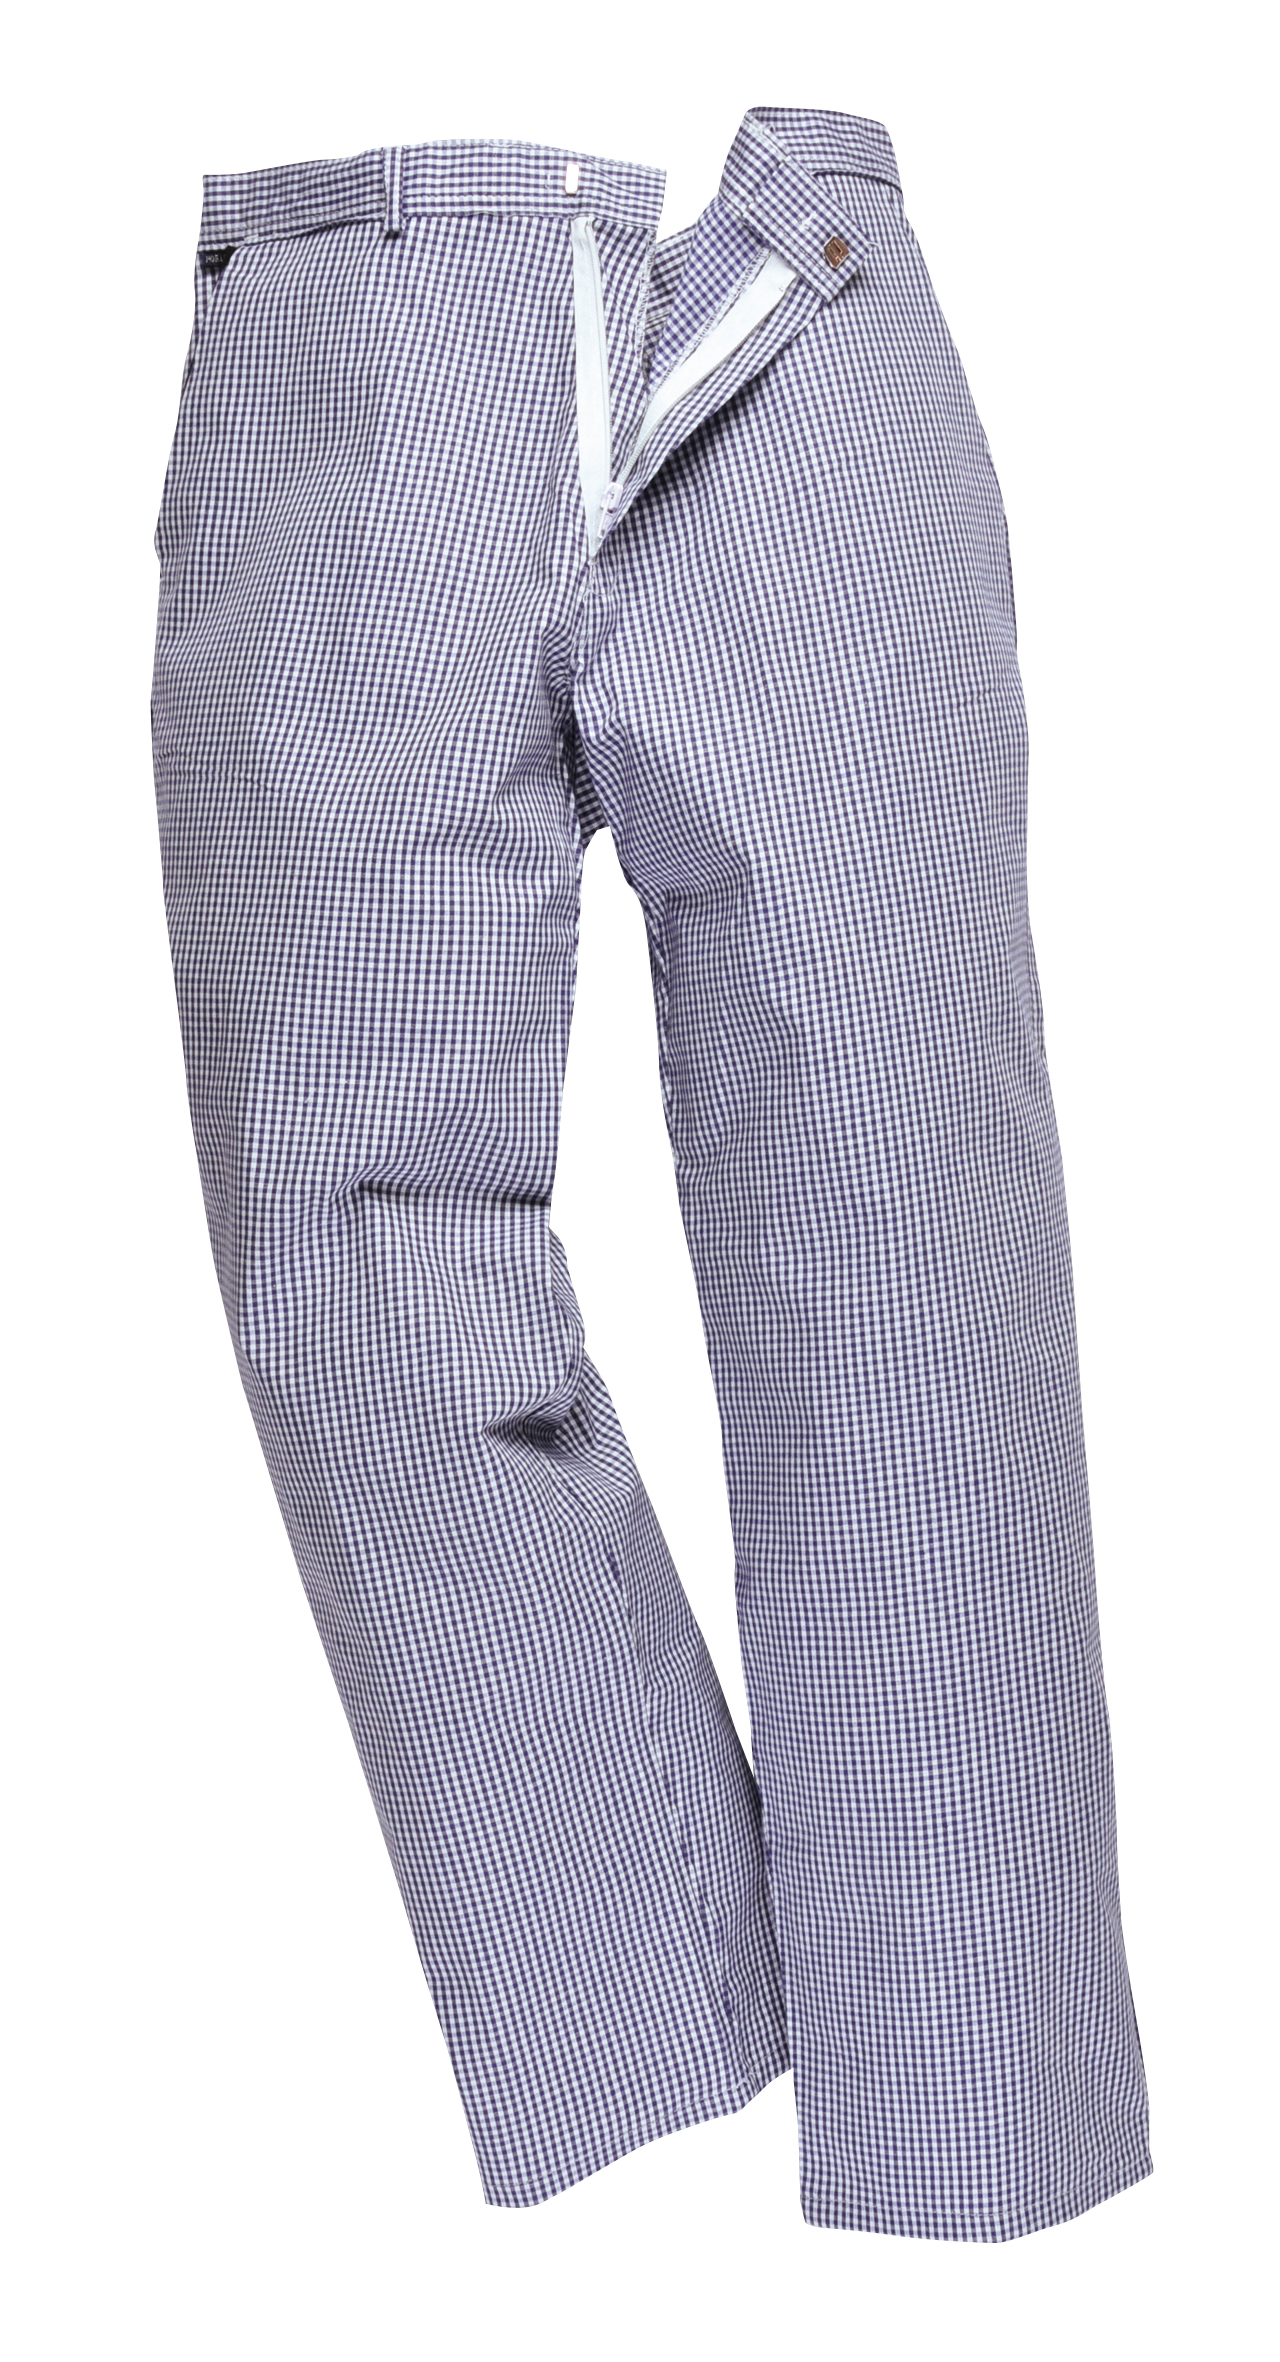 Portwest S884 Greenwich Chefs Trousers -0